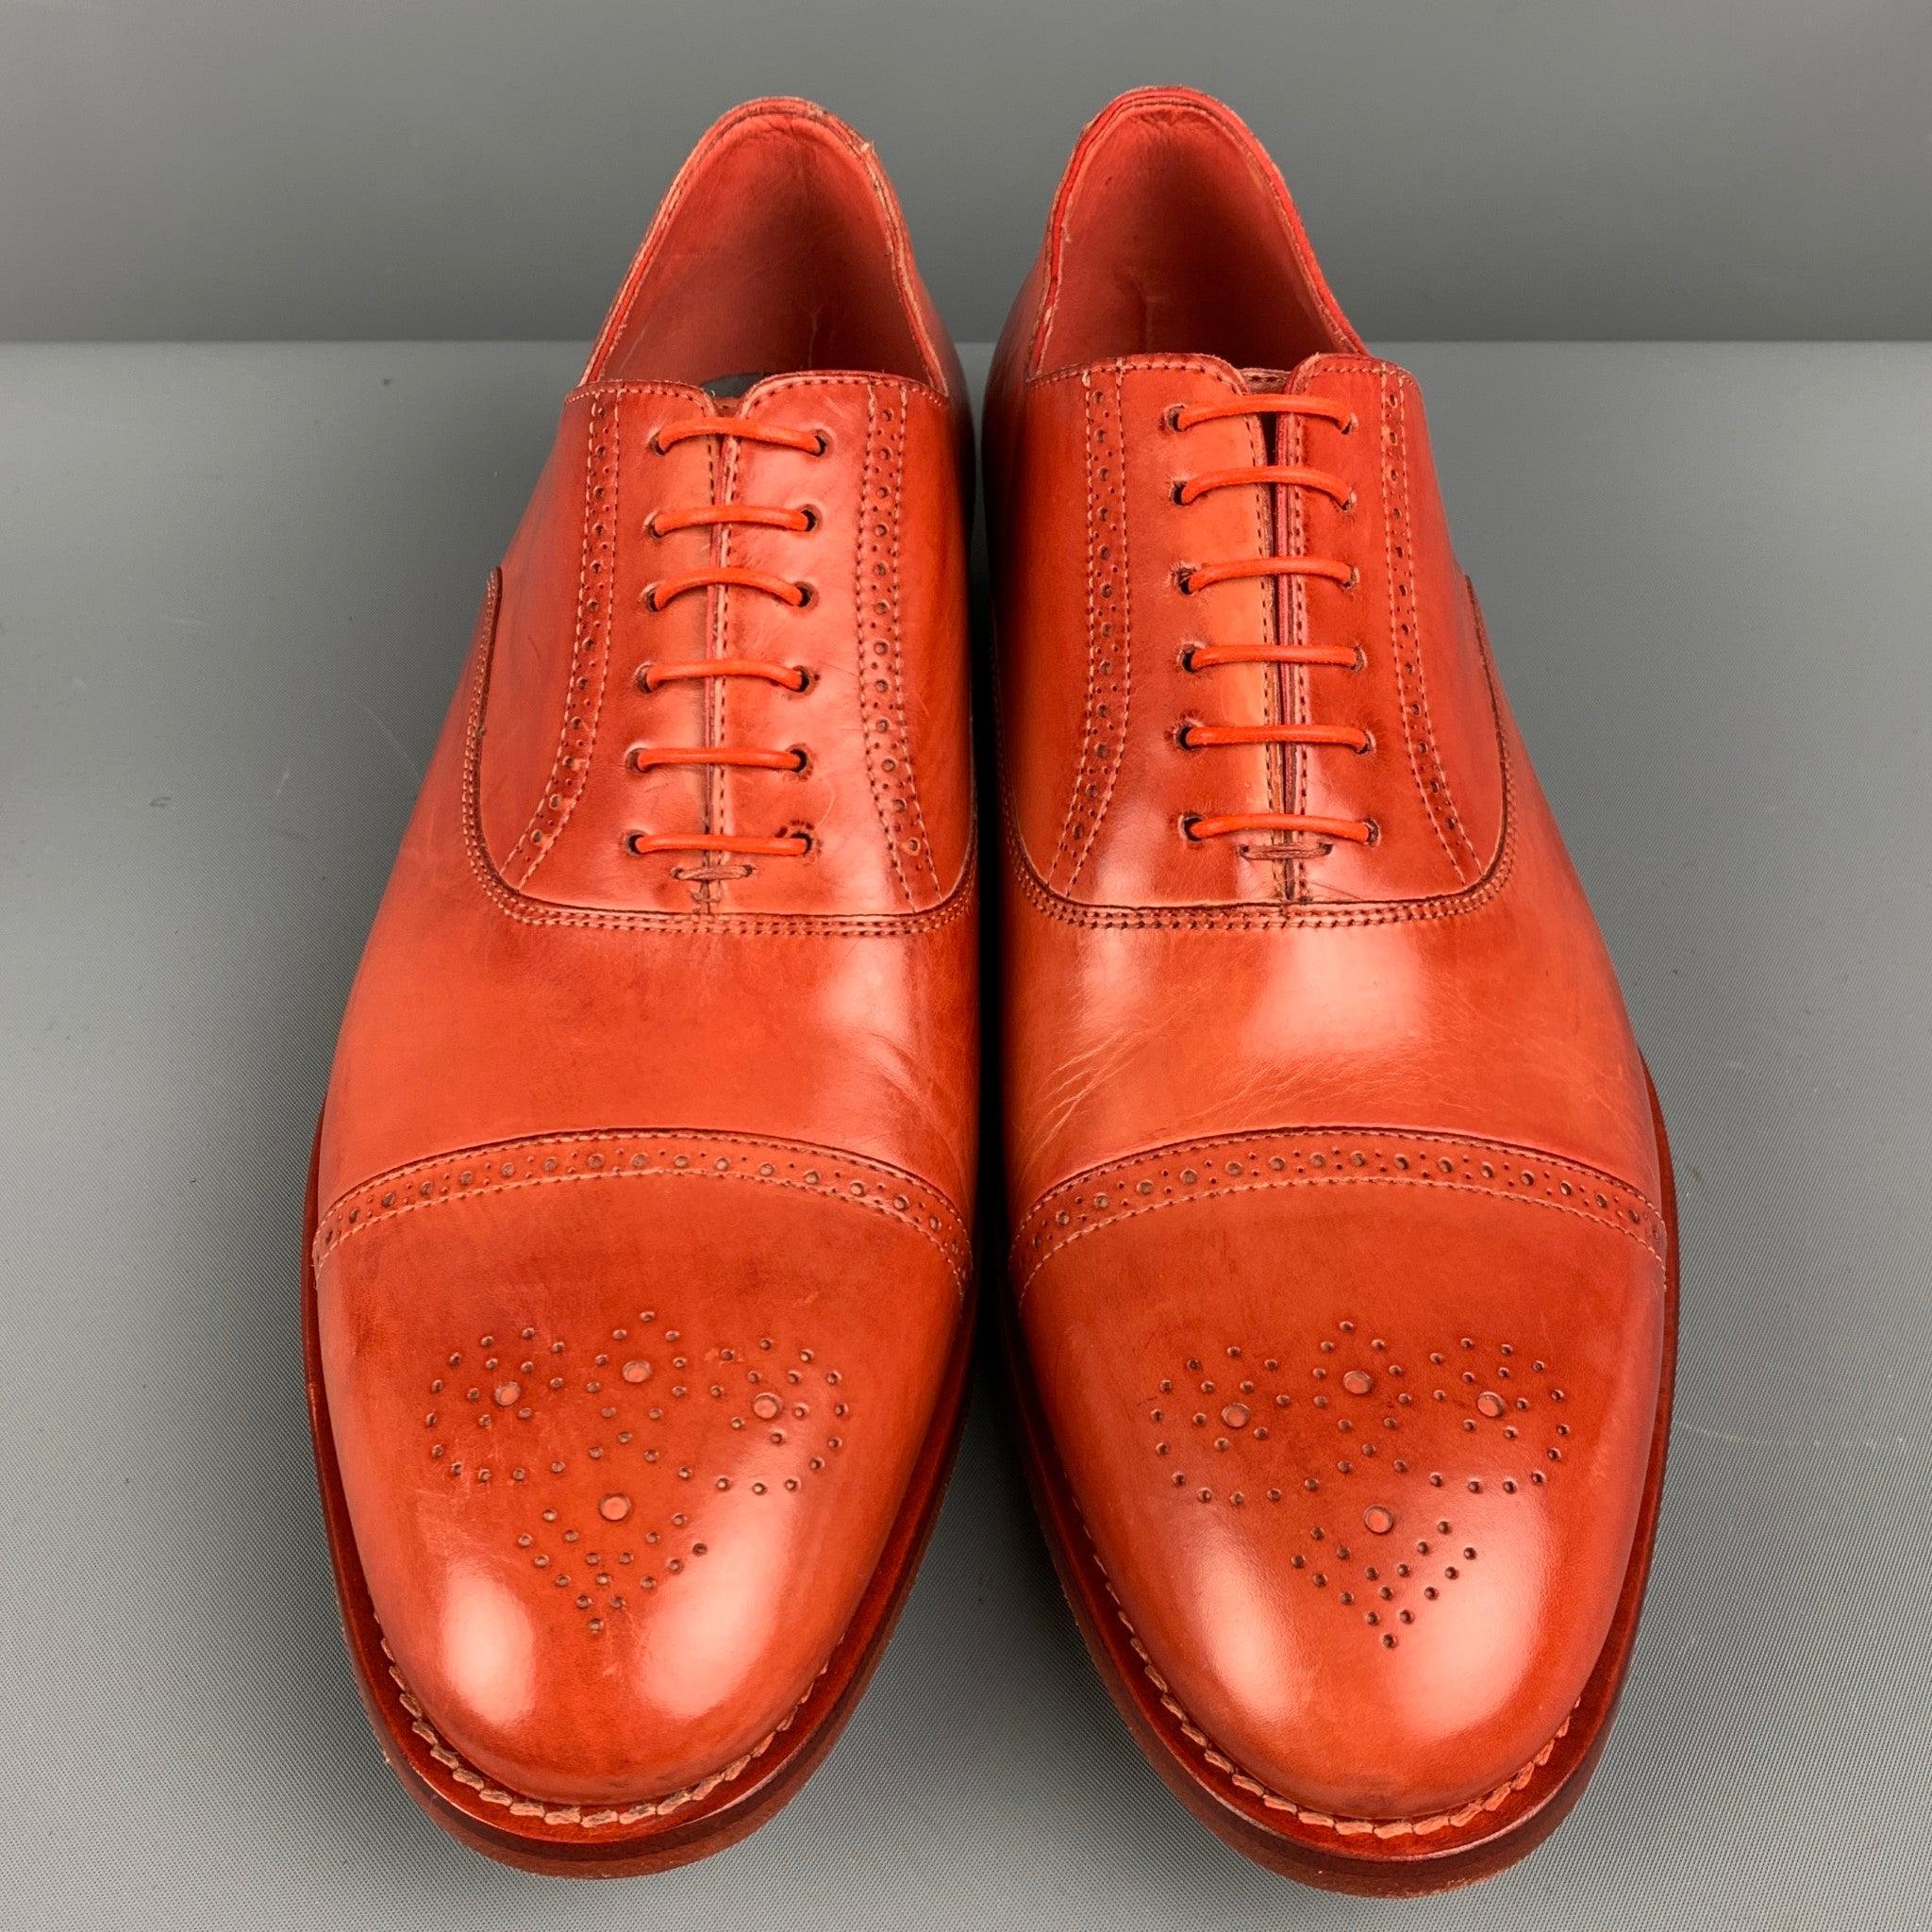 Men's PAUL SMITH Size 8.5 Orange Perforated Leather Cap Toe Lace Up Shoes For Sale